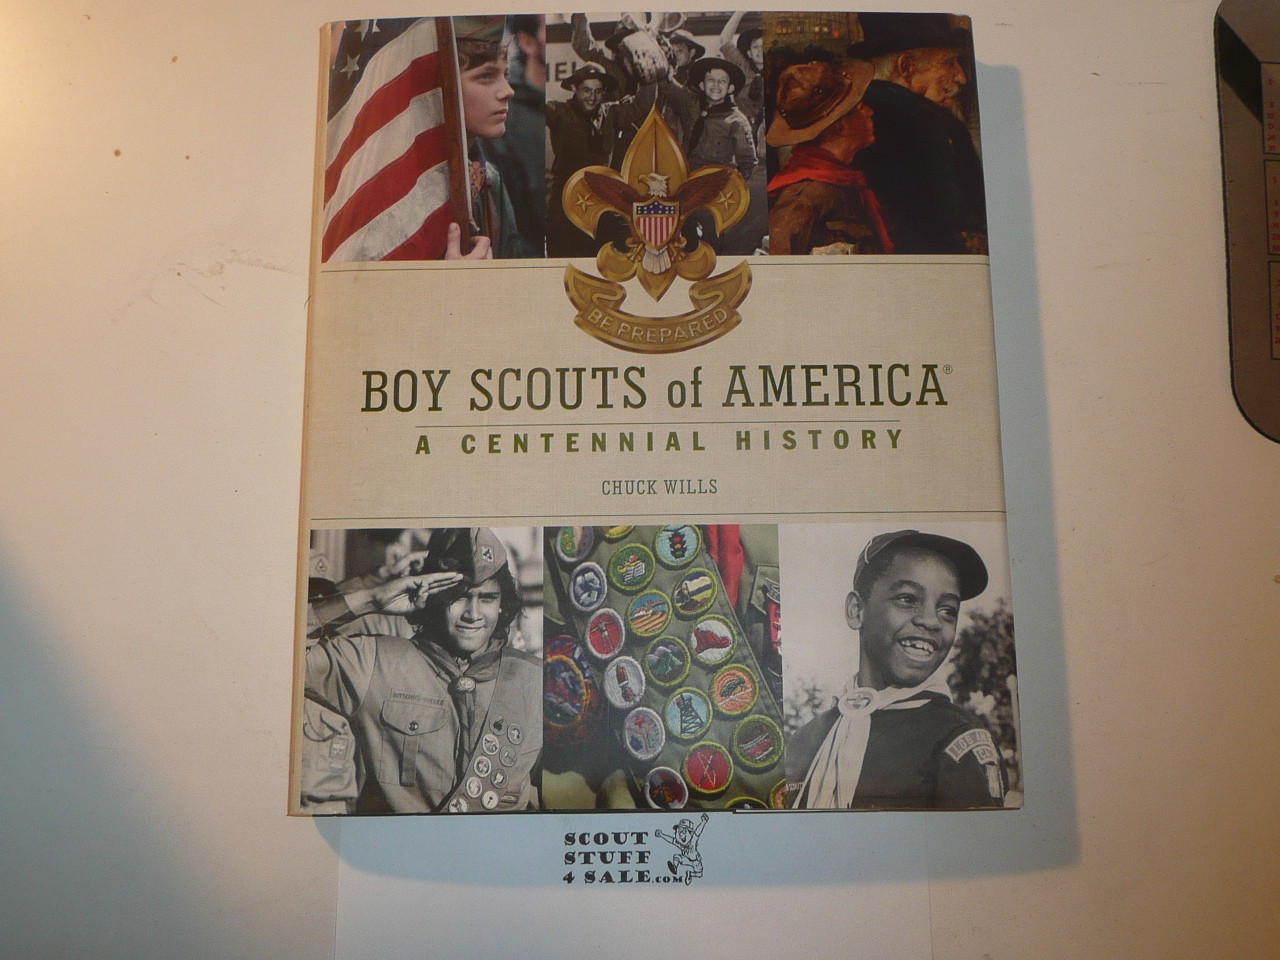 Boy Scouts of America, A Centennial History, by Chuck Wills, hardbound with dust jacket, 2010